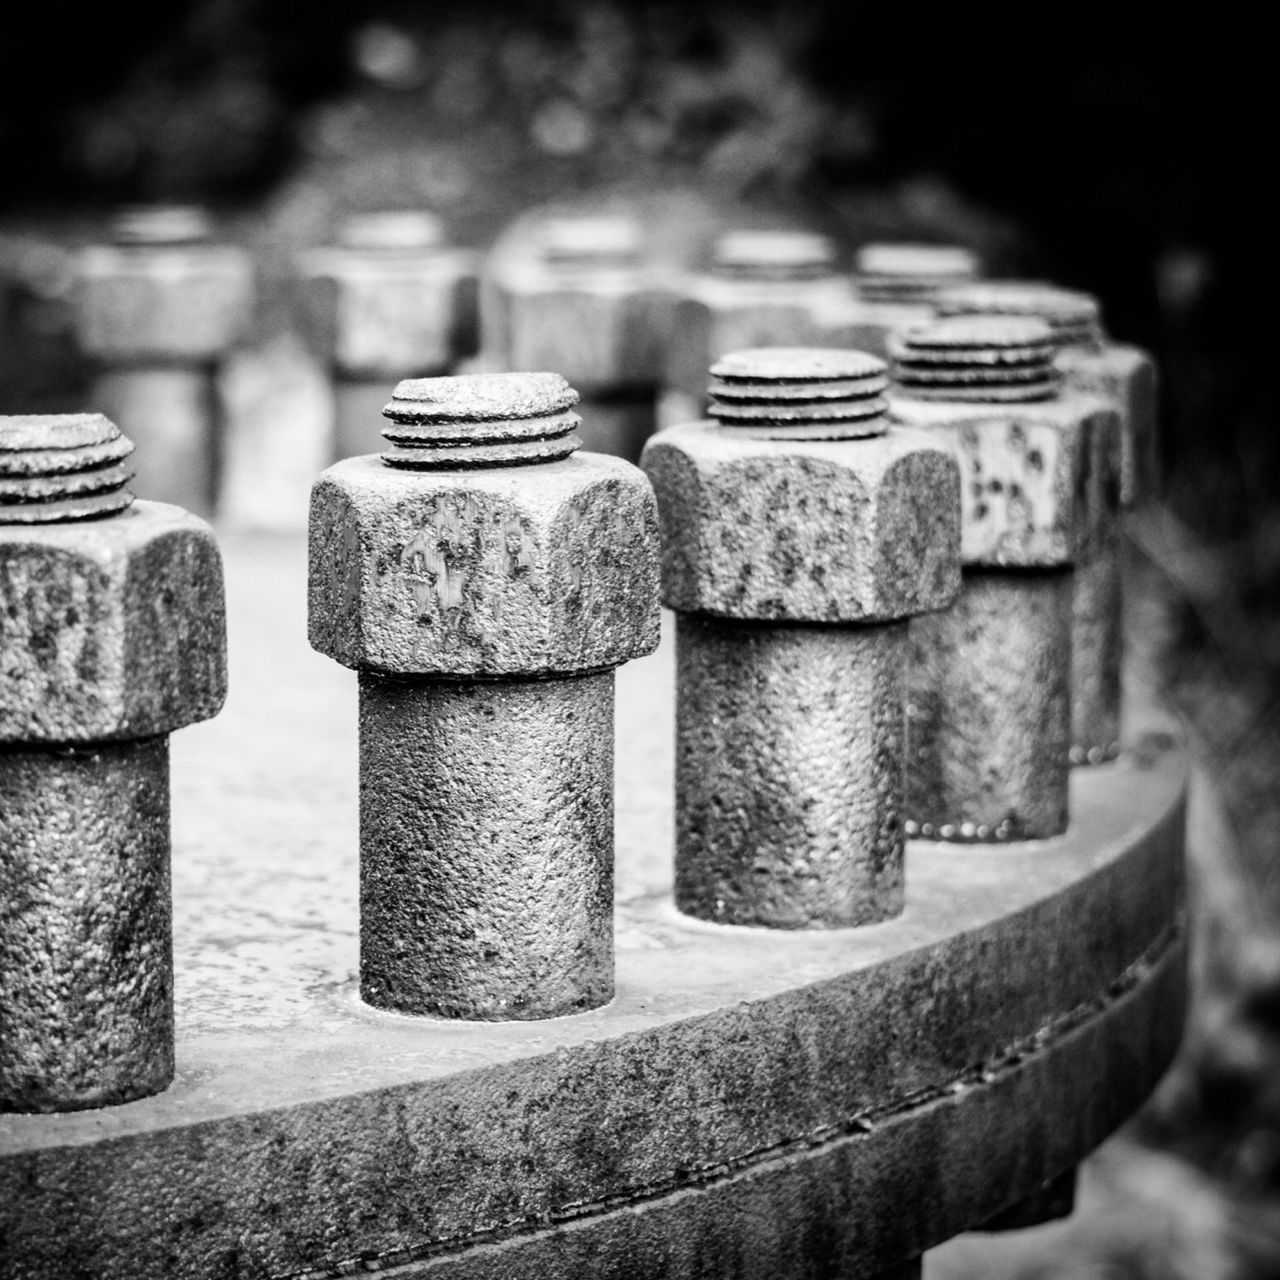 focus on foreground, close-up, metal, old, rusty, metallic, in a row, weathered, selective focus, outdoors, day, no people, history, container, still life, abandoned, the past, deterioration, run-down, built structure